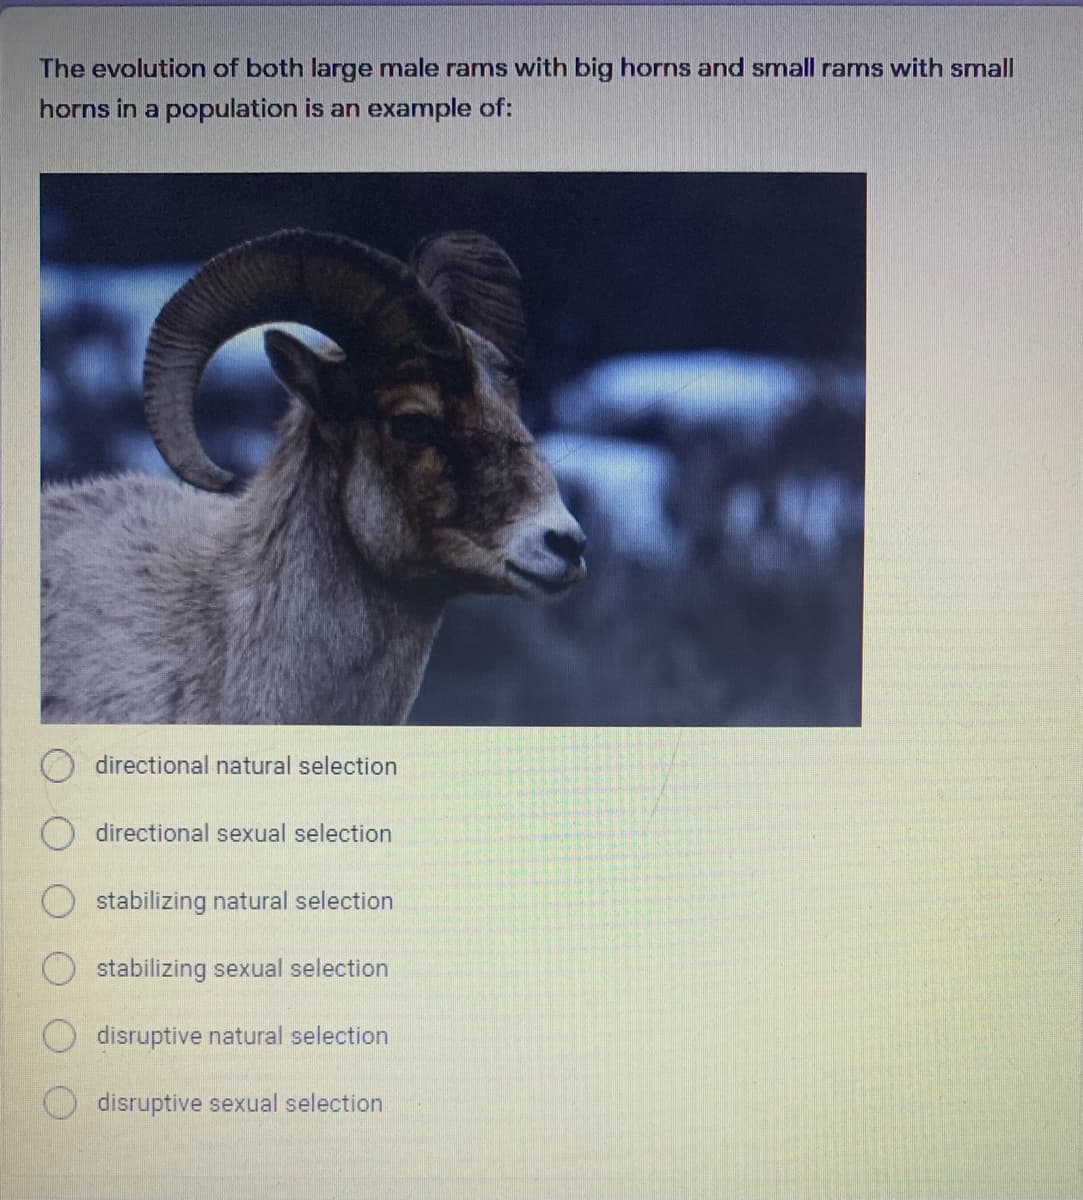 The evolution of both large male rams with big horns and small rams with small
horns in a population is an example of:
directional natural selection
directional sexual selection
stabilizing natural selection
stabilizing sexual selection
disruptive natural selection
disruptive sexual selection
